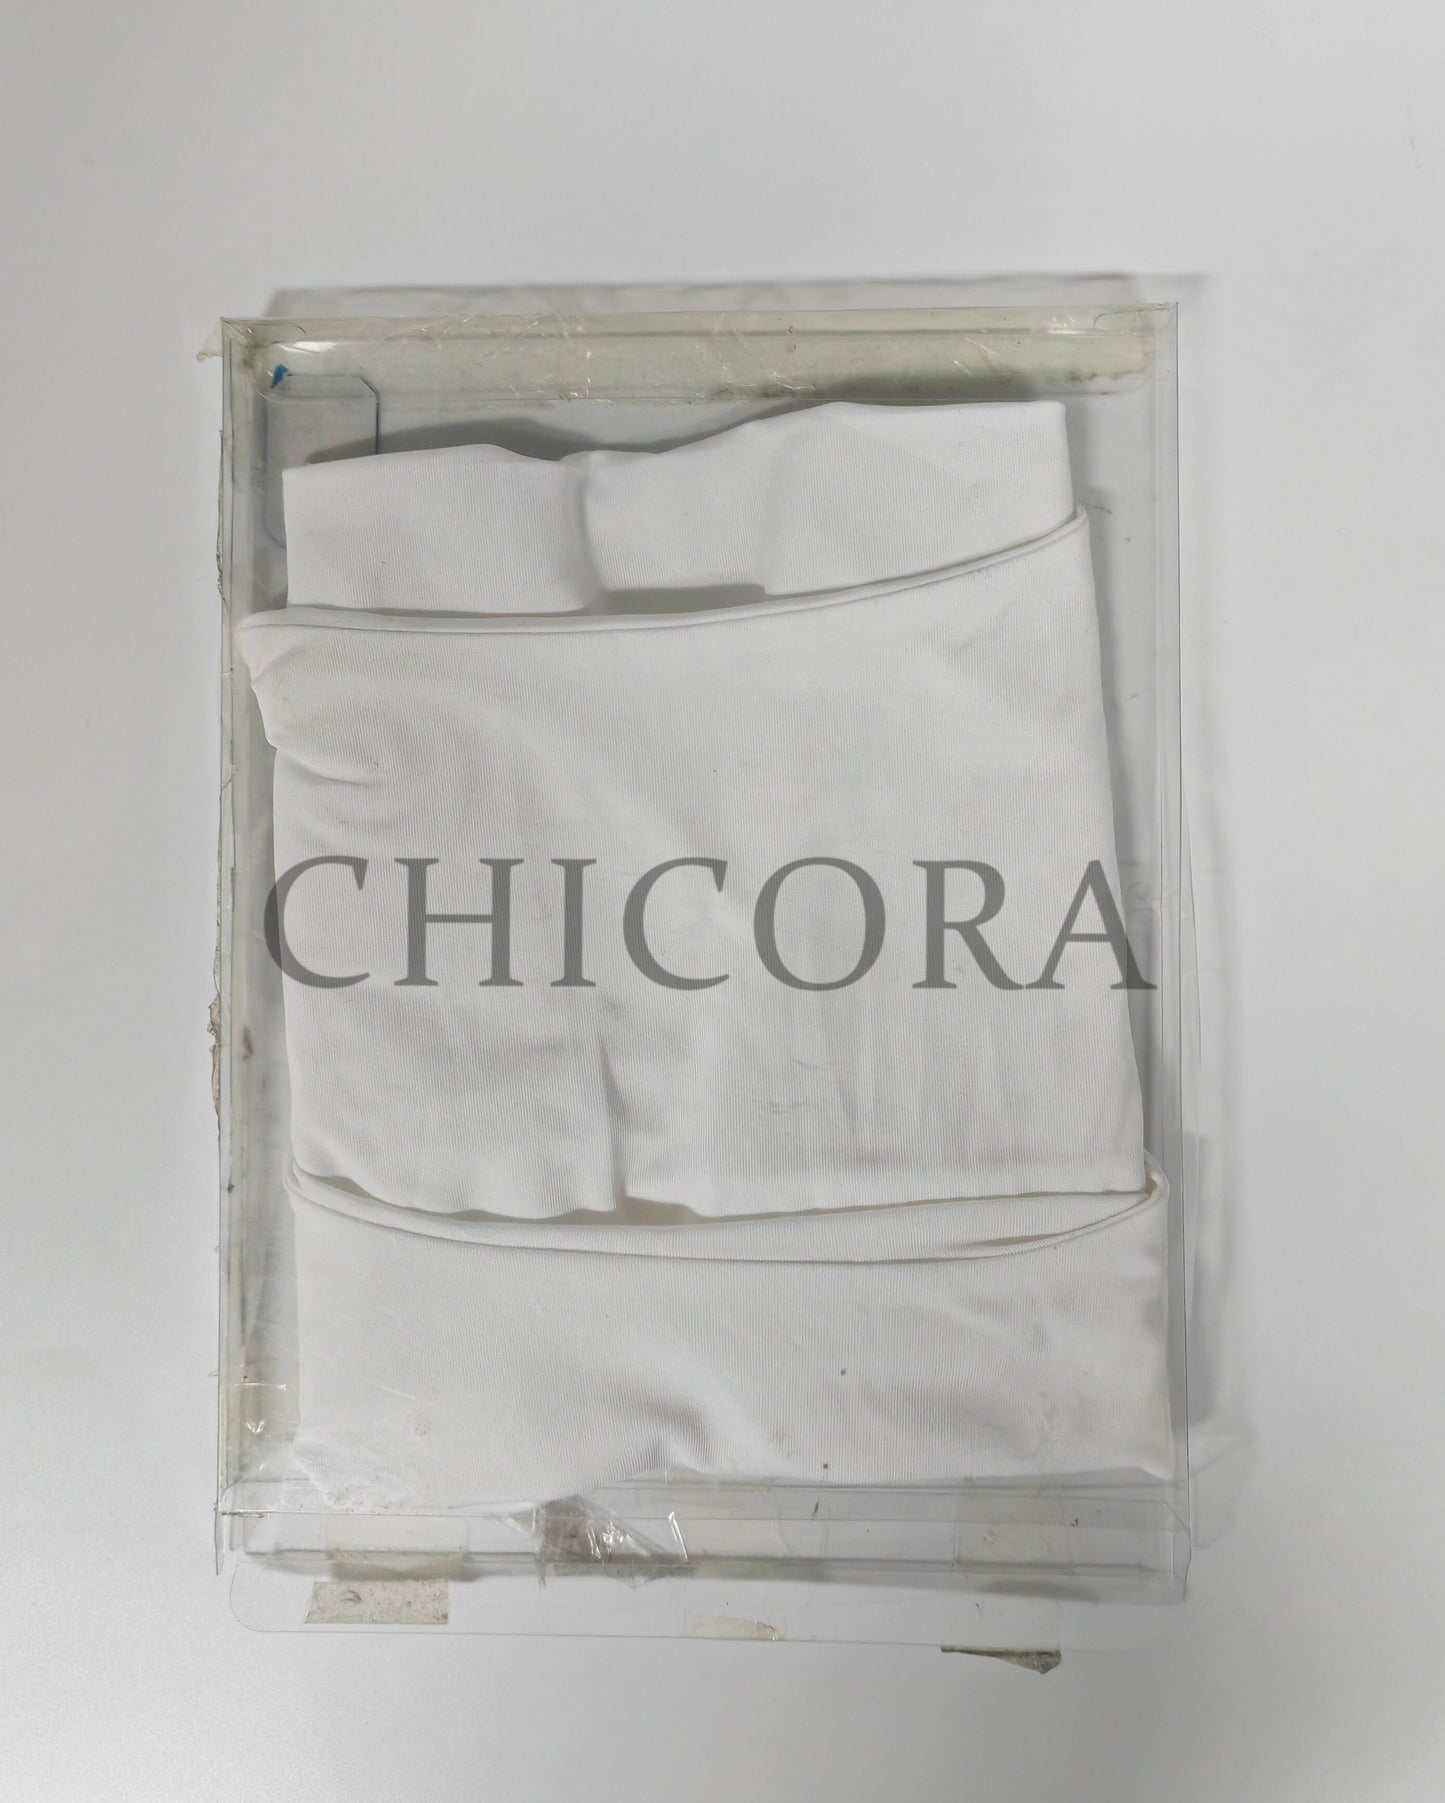 CHICORA Tank Top for Women Sleeveless Crop Tops Square Neck Tanks Crop